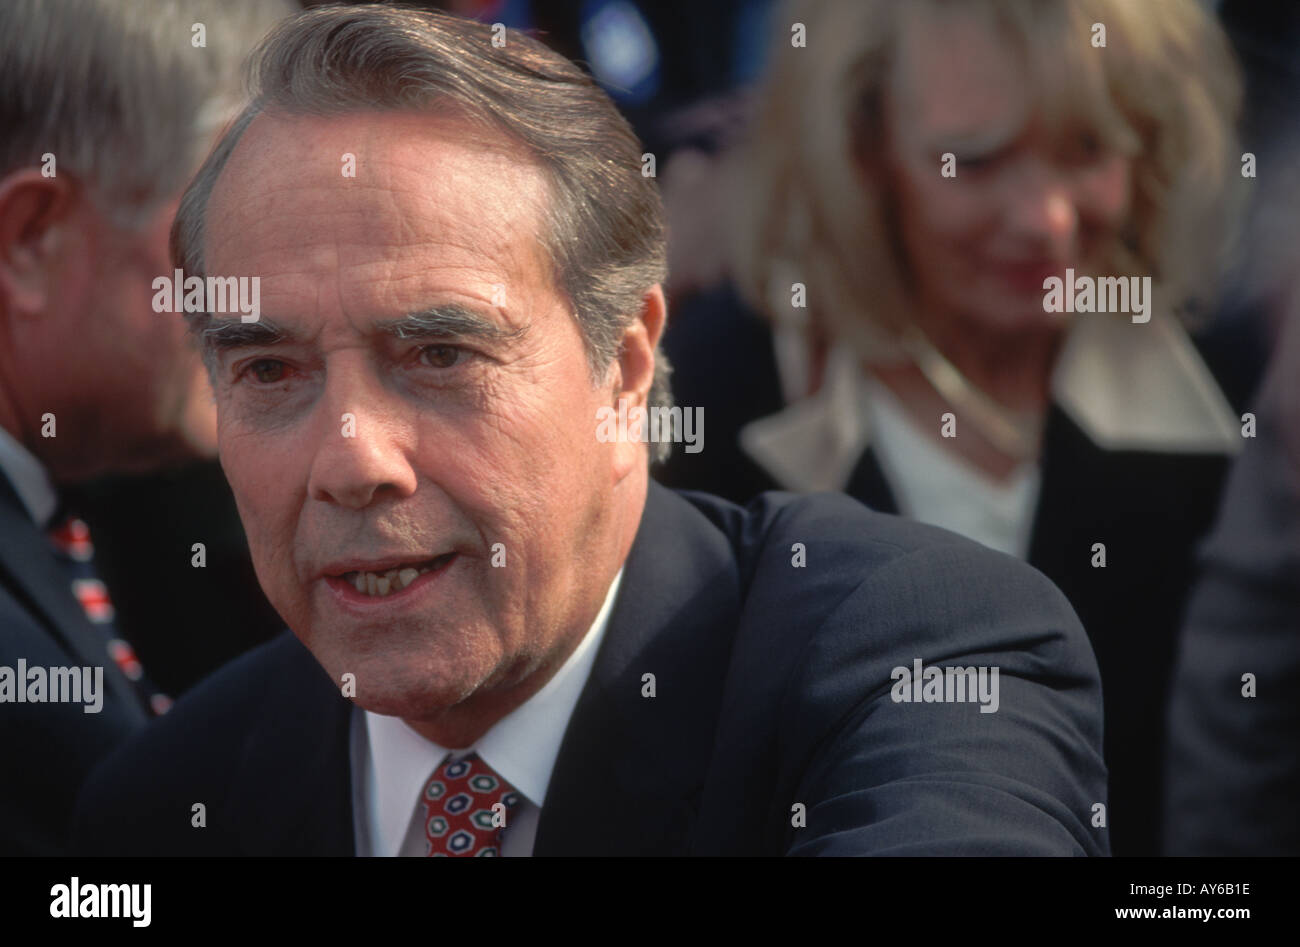 Bob Dole candidate for president in 1996 campaigns in New Hampshire United States Stock Photo